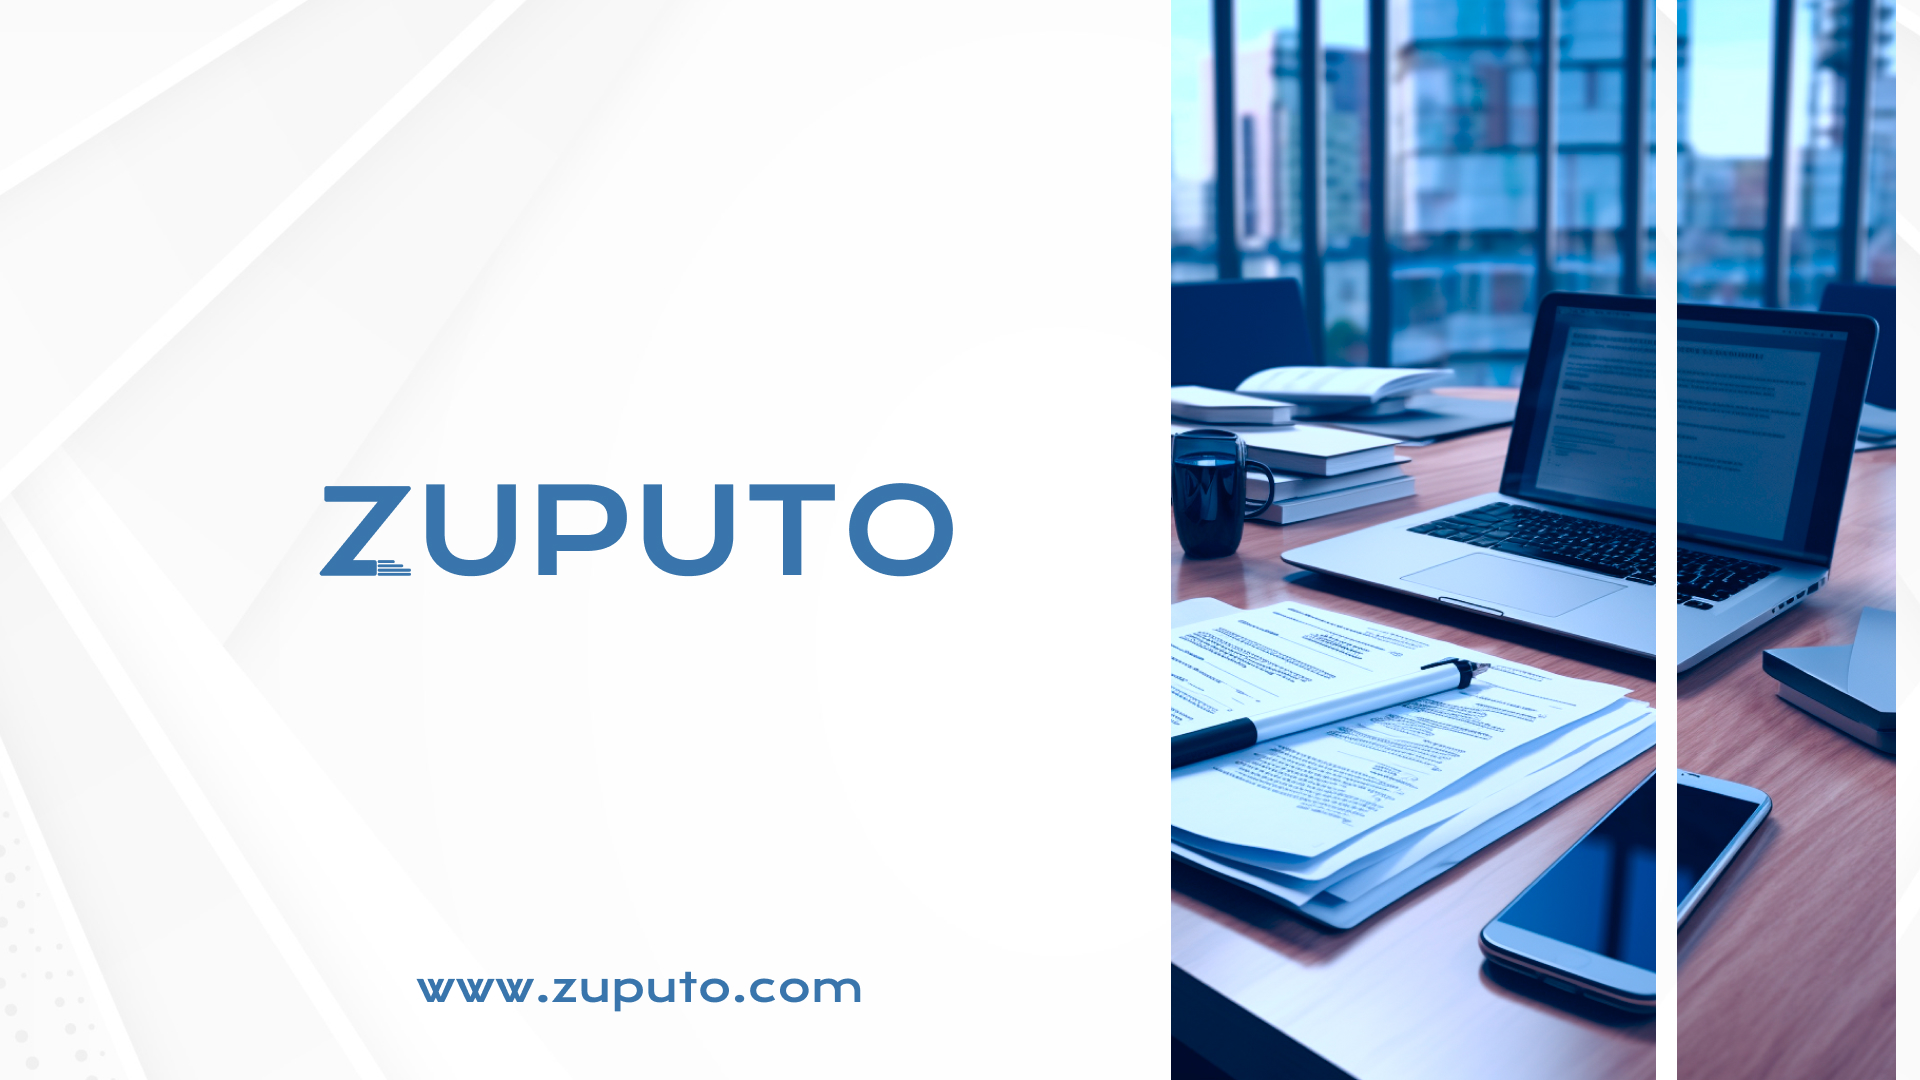 Zuputo: Africa’s First Women-Led Legal Tech Startup Launches